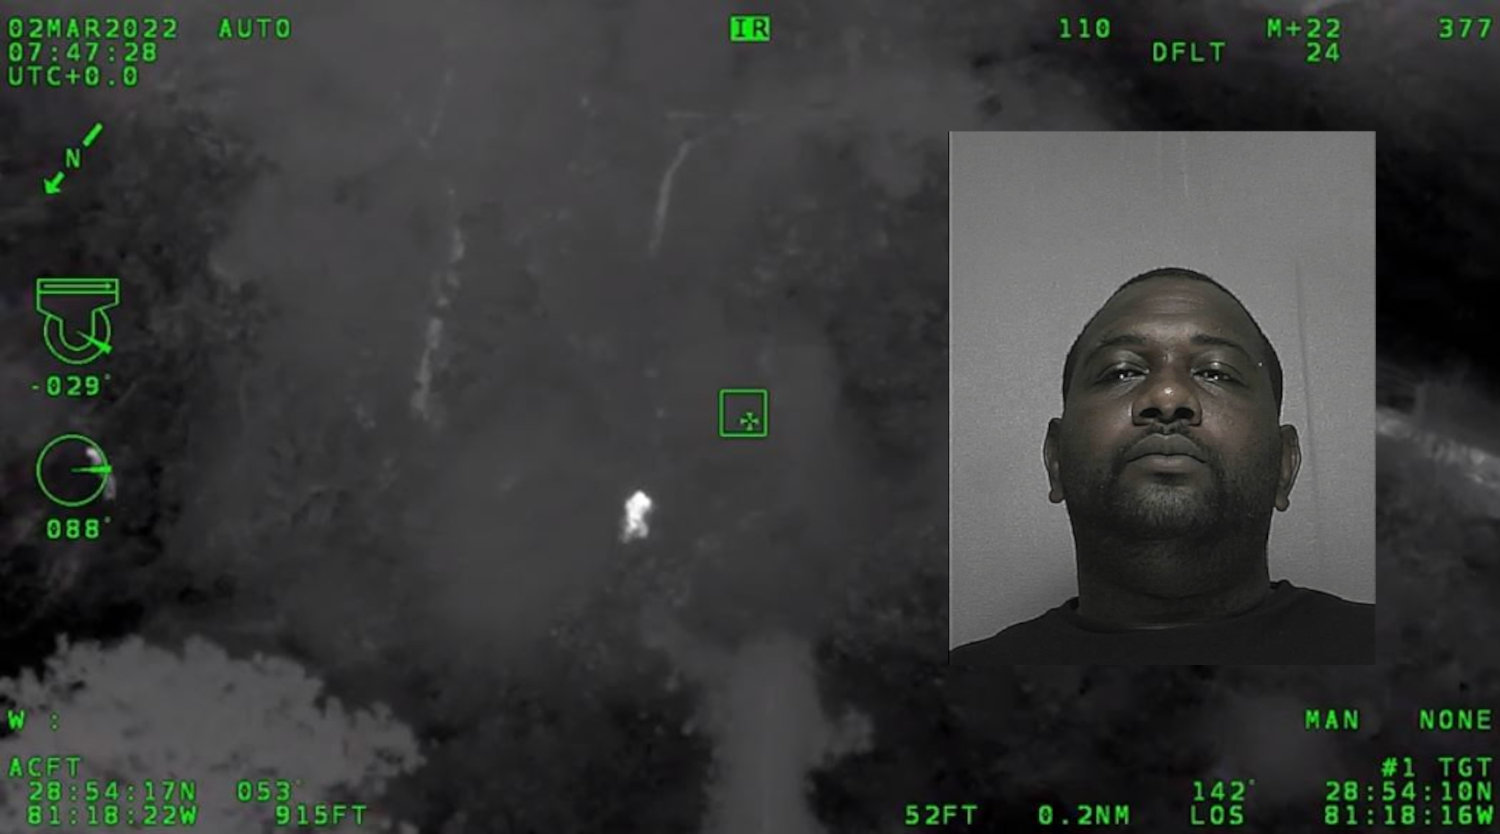 A view from Air One with Elger Johnson's heat signature in the middle of the screen. Inset: Elger Johnson's 2012 booking photo